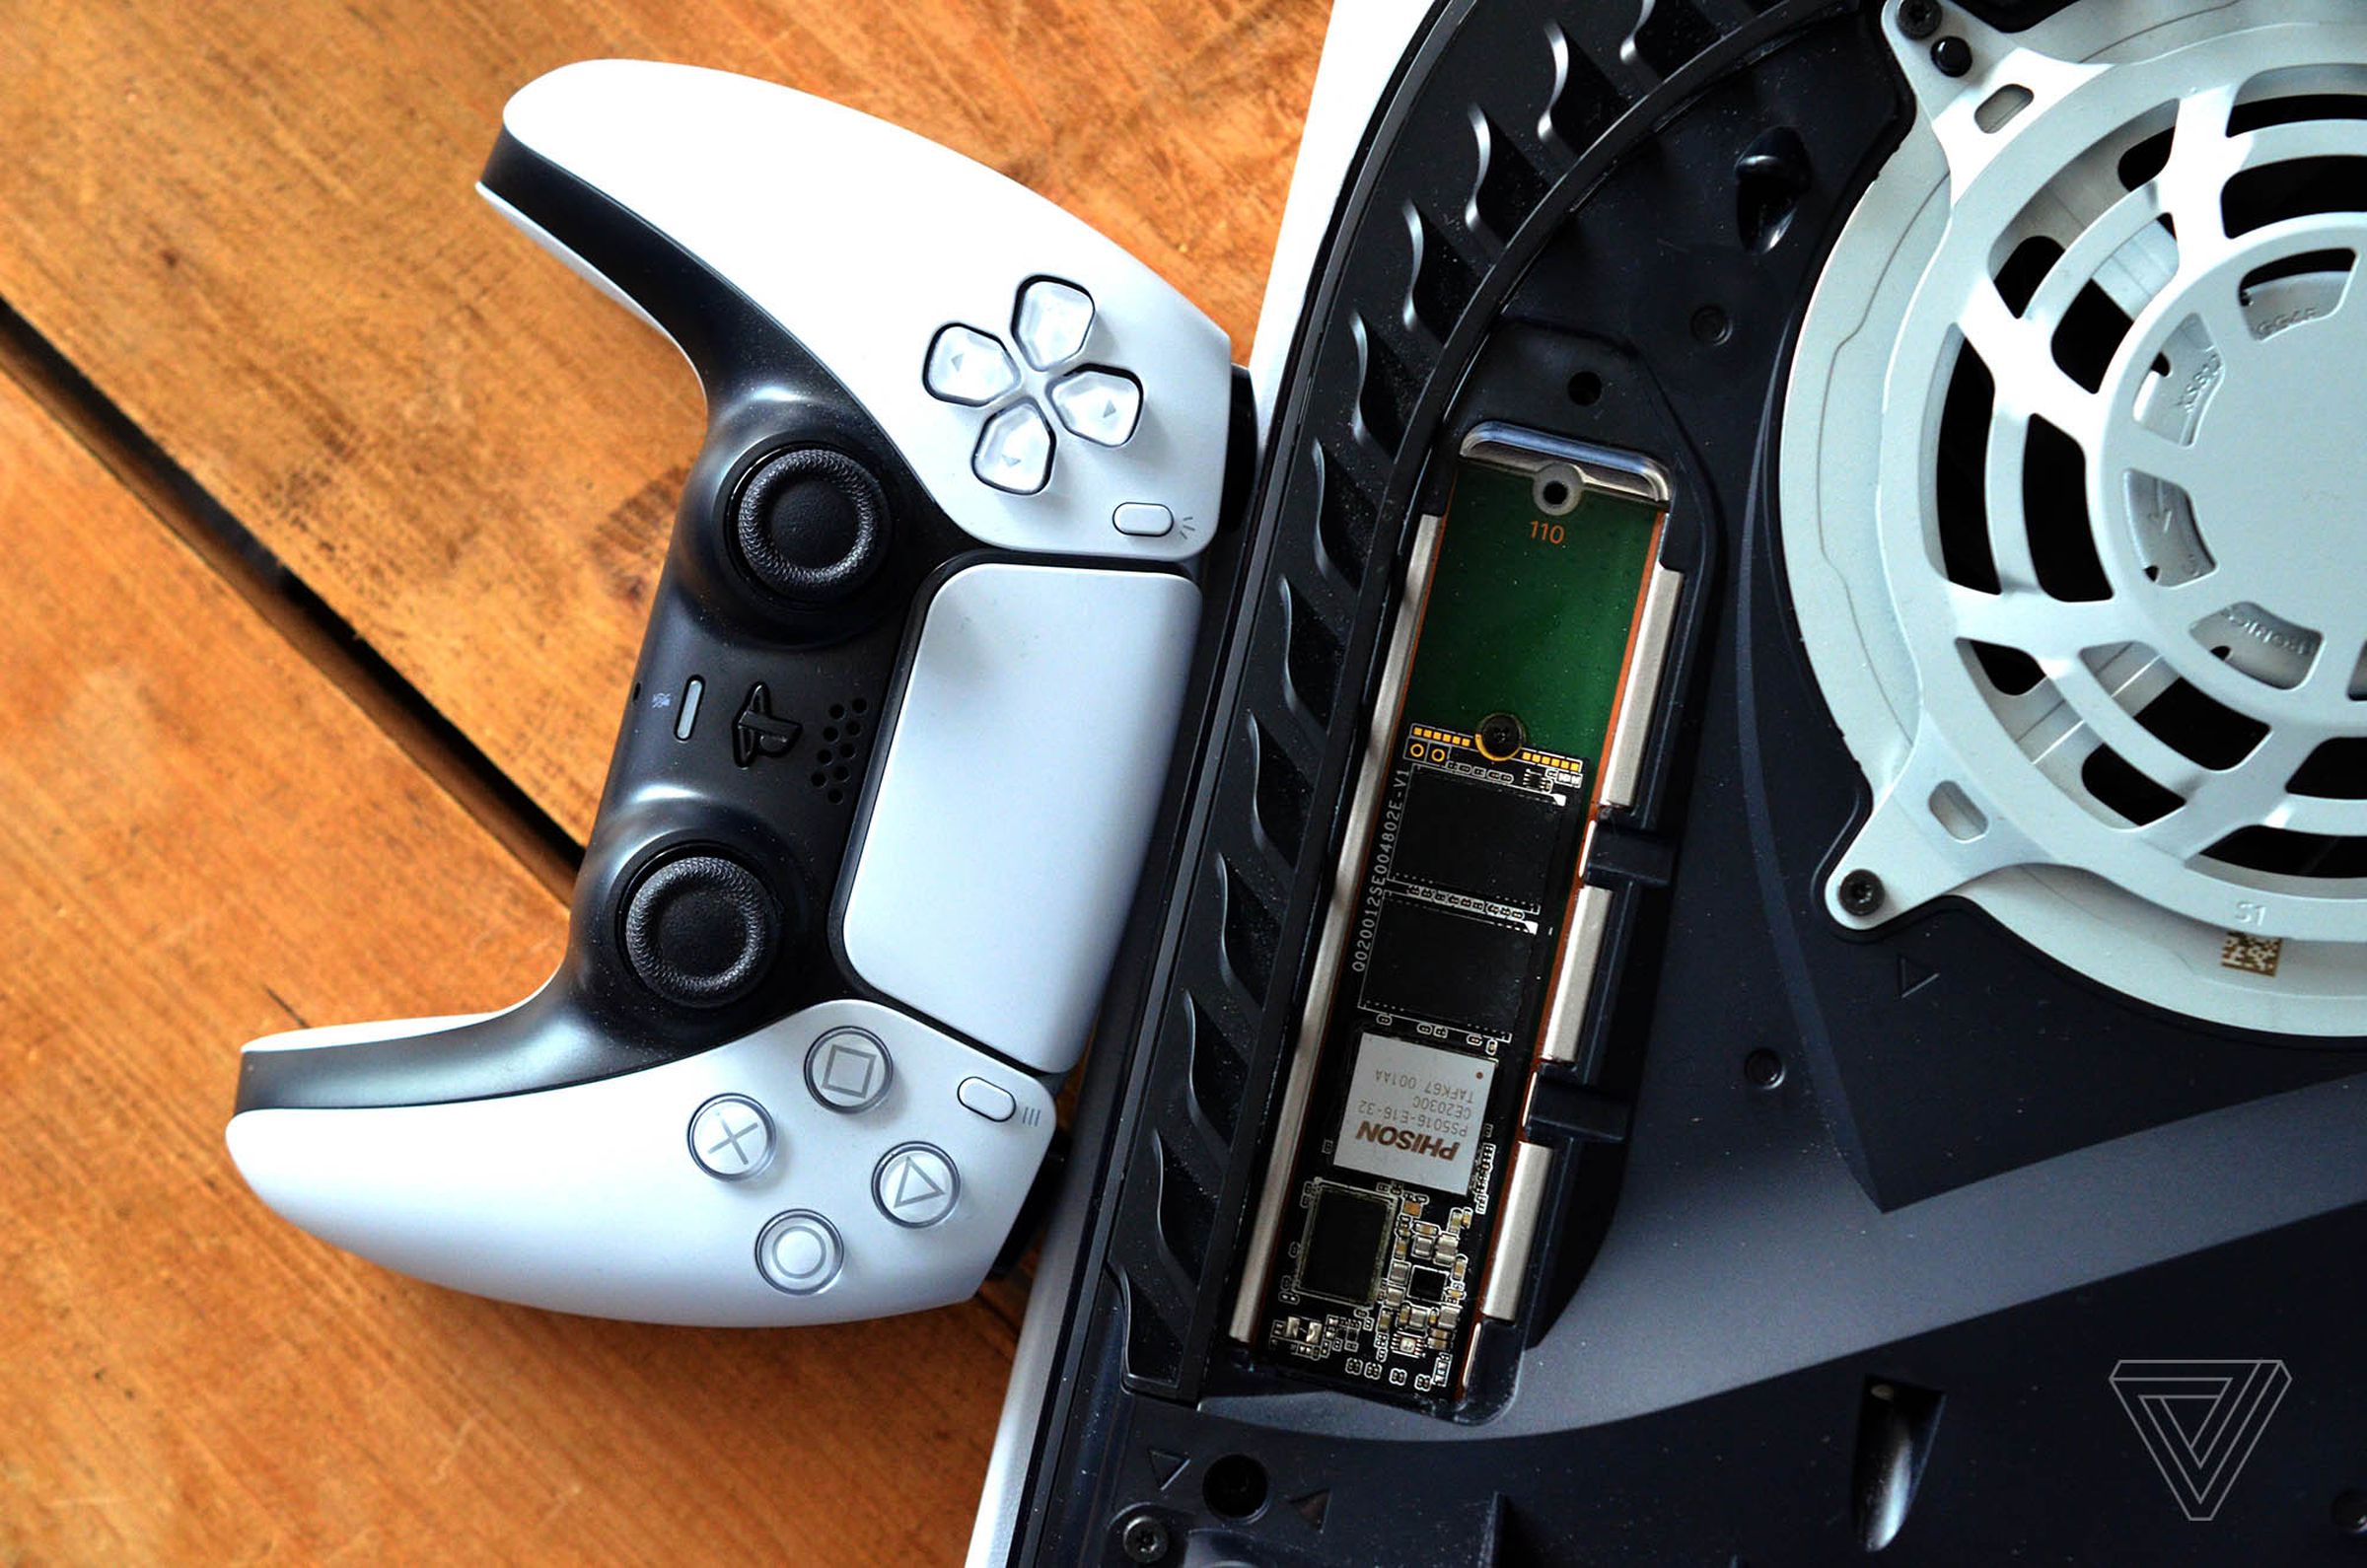 A close-up of a partially opened PlayStation 5 console, showing a user-installed SSD, with a DualSense controller sitting beside it.